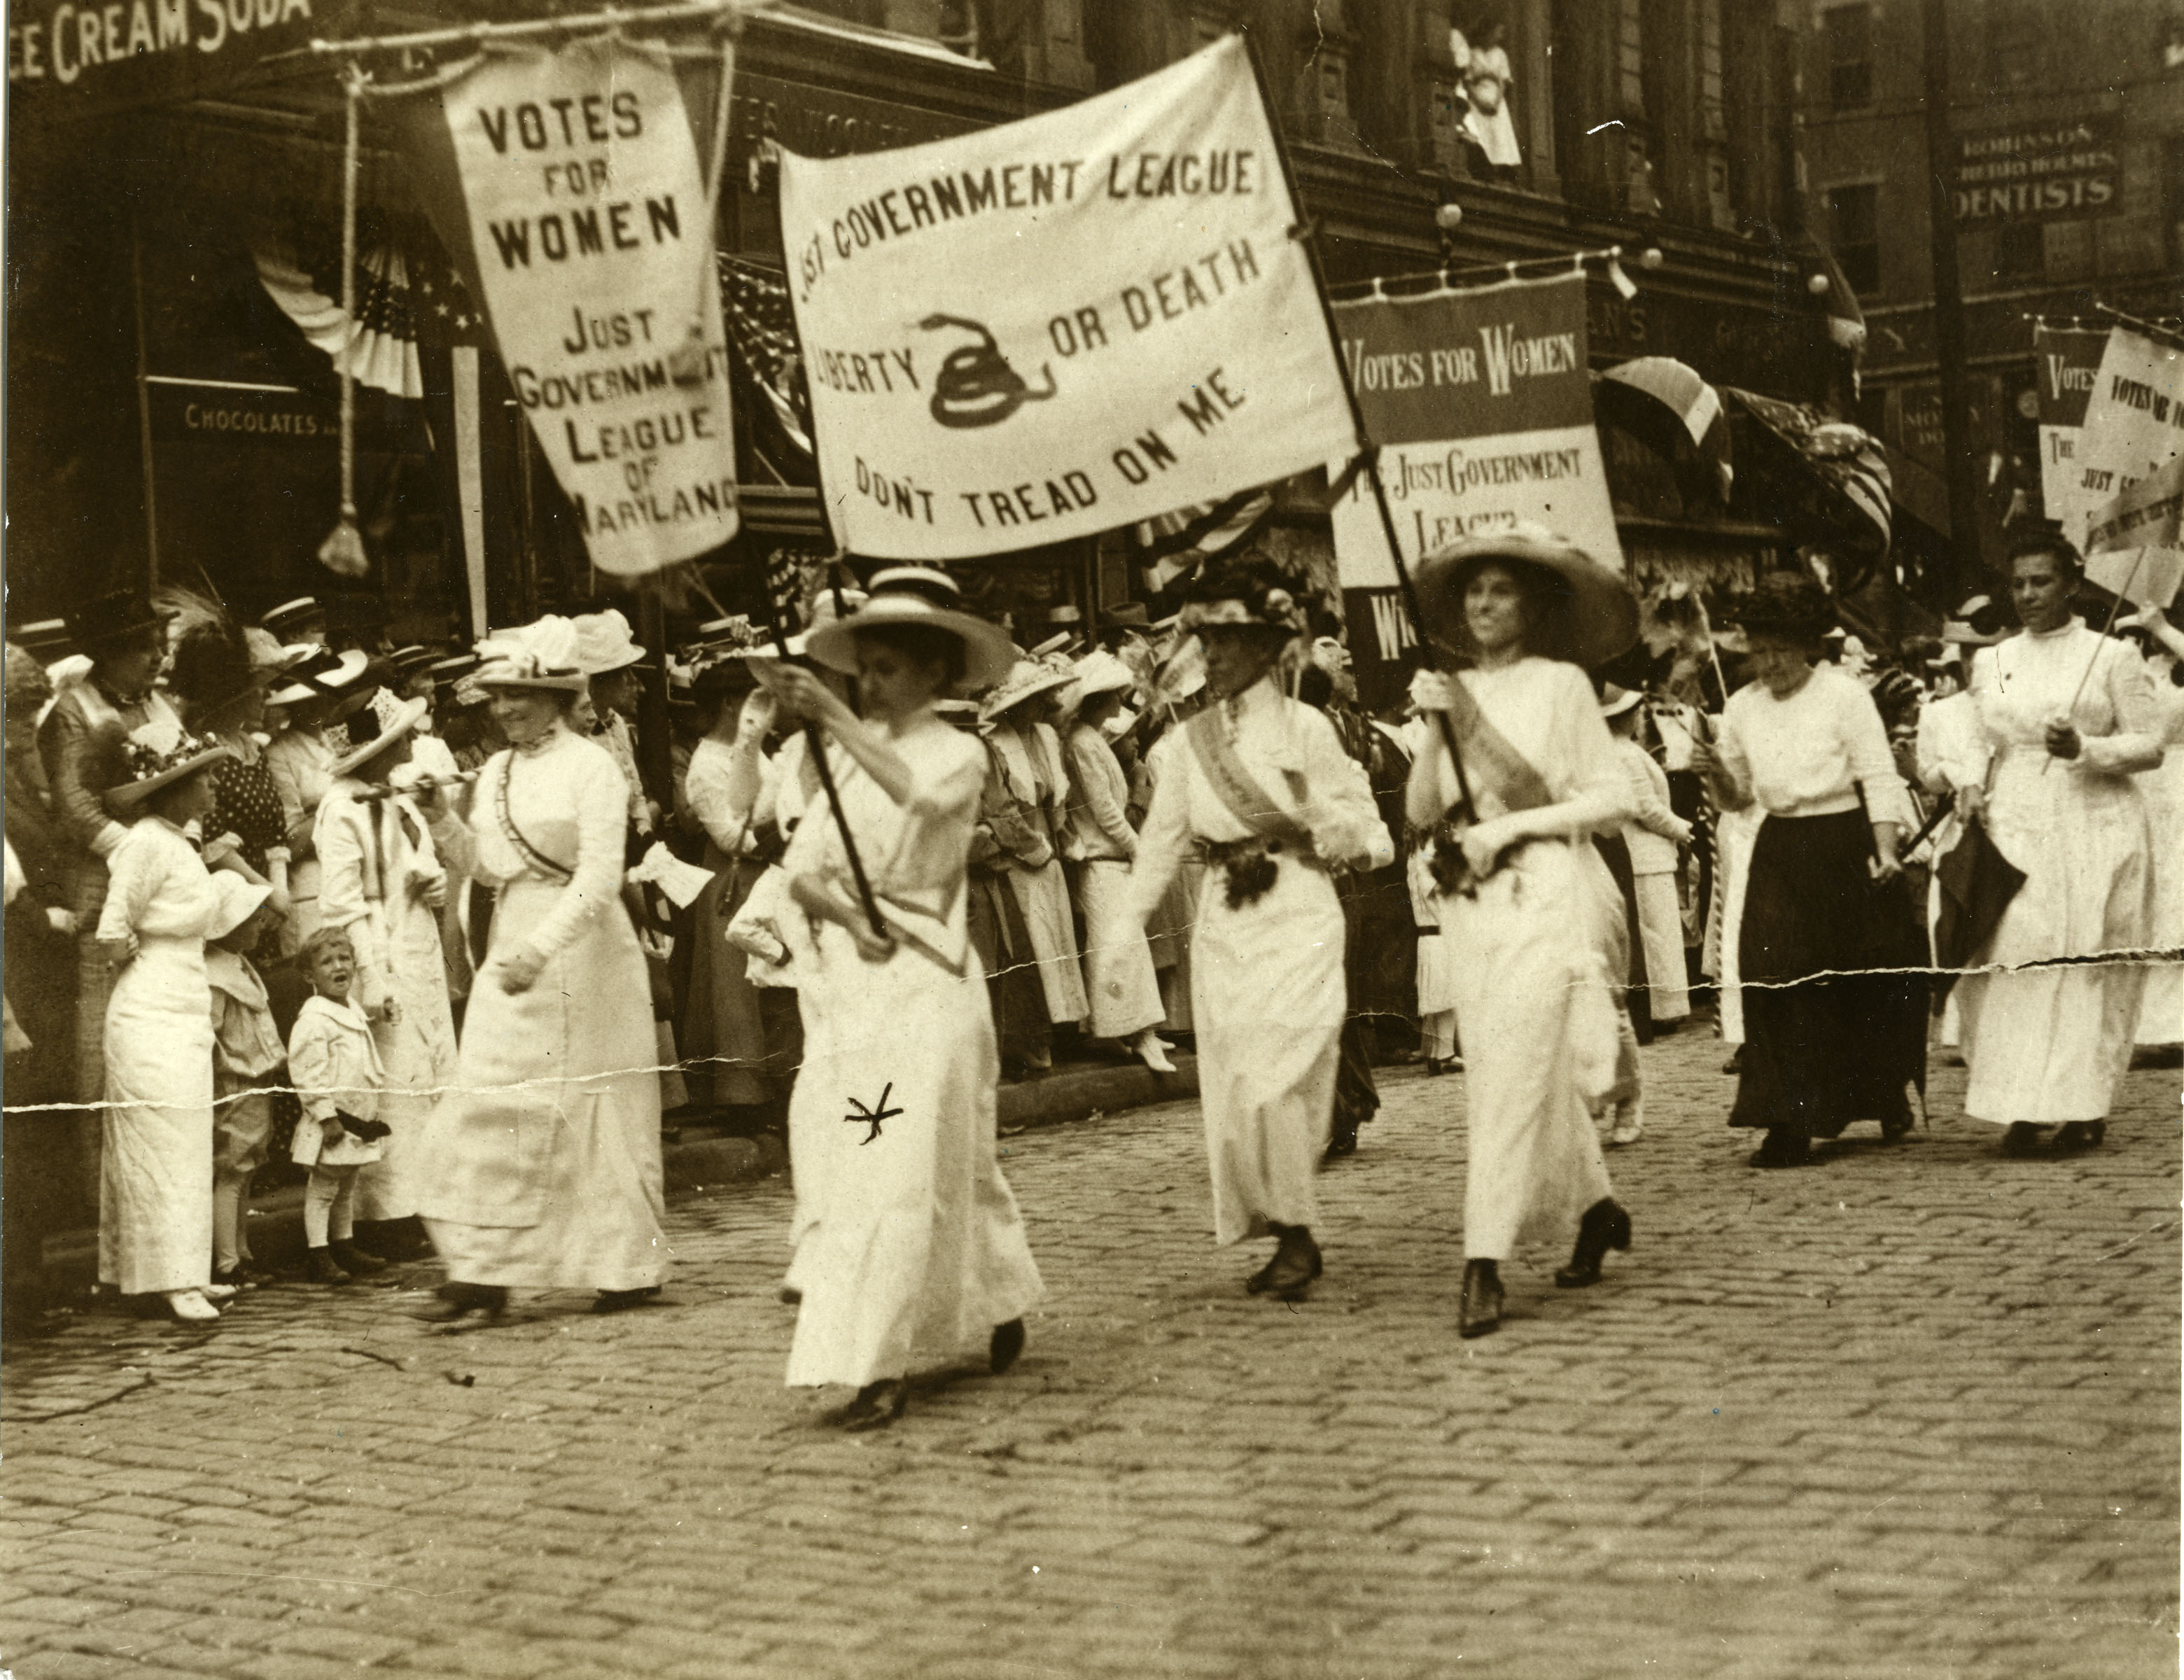 Image of Parade of Suffragists